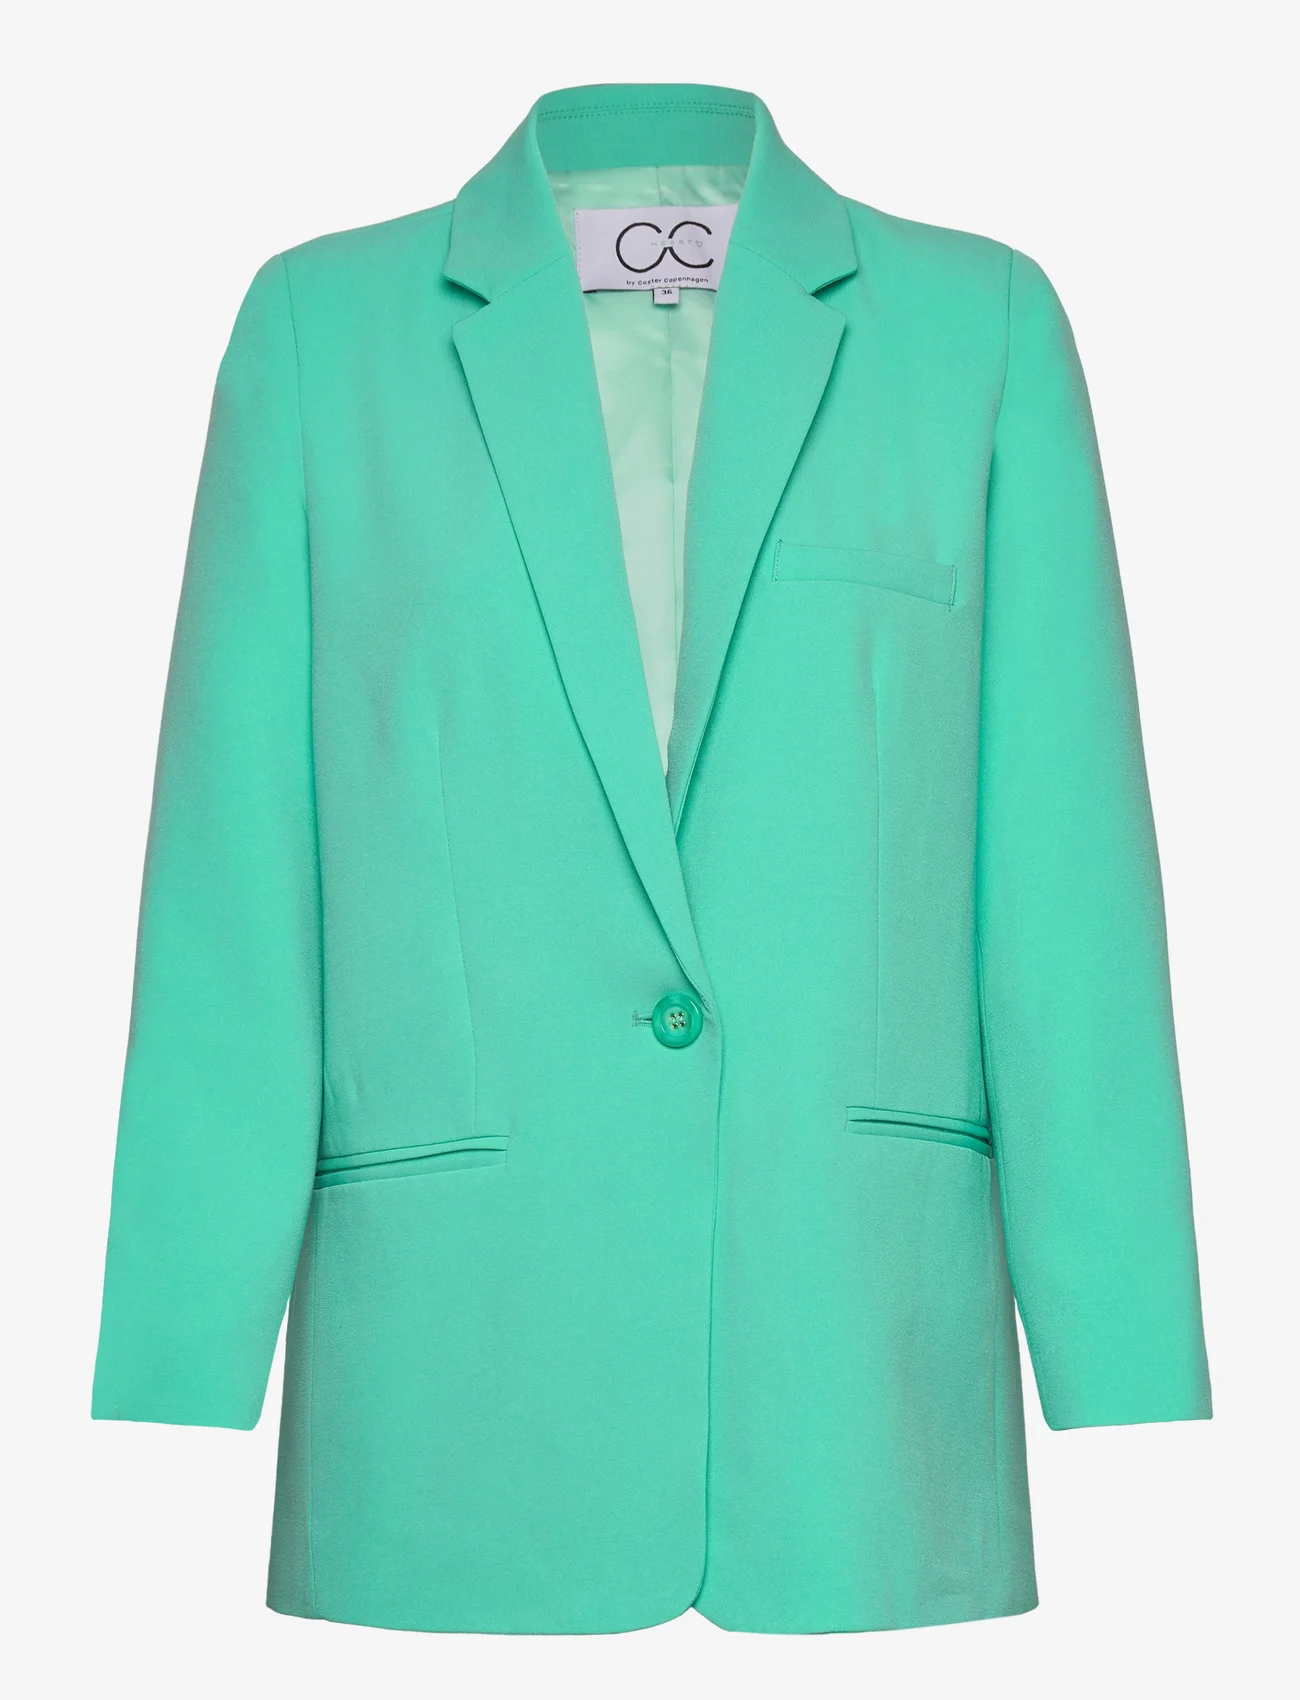 Coster Copenhagen - CC Heart ADA oversize blazer - party wear at outlet prices - mint - 0